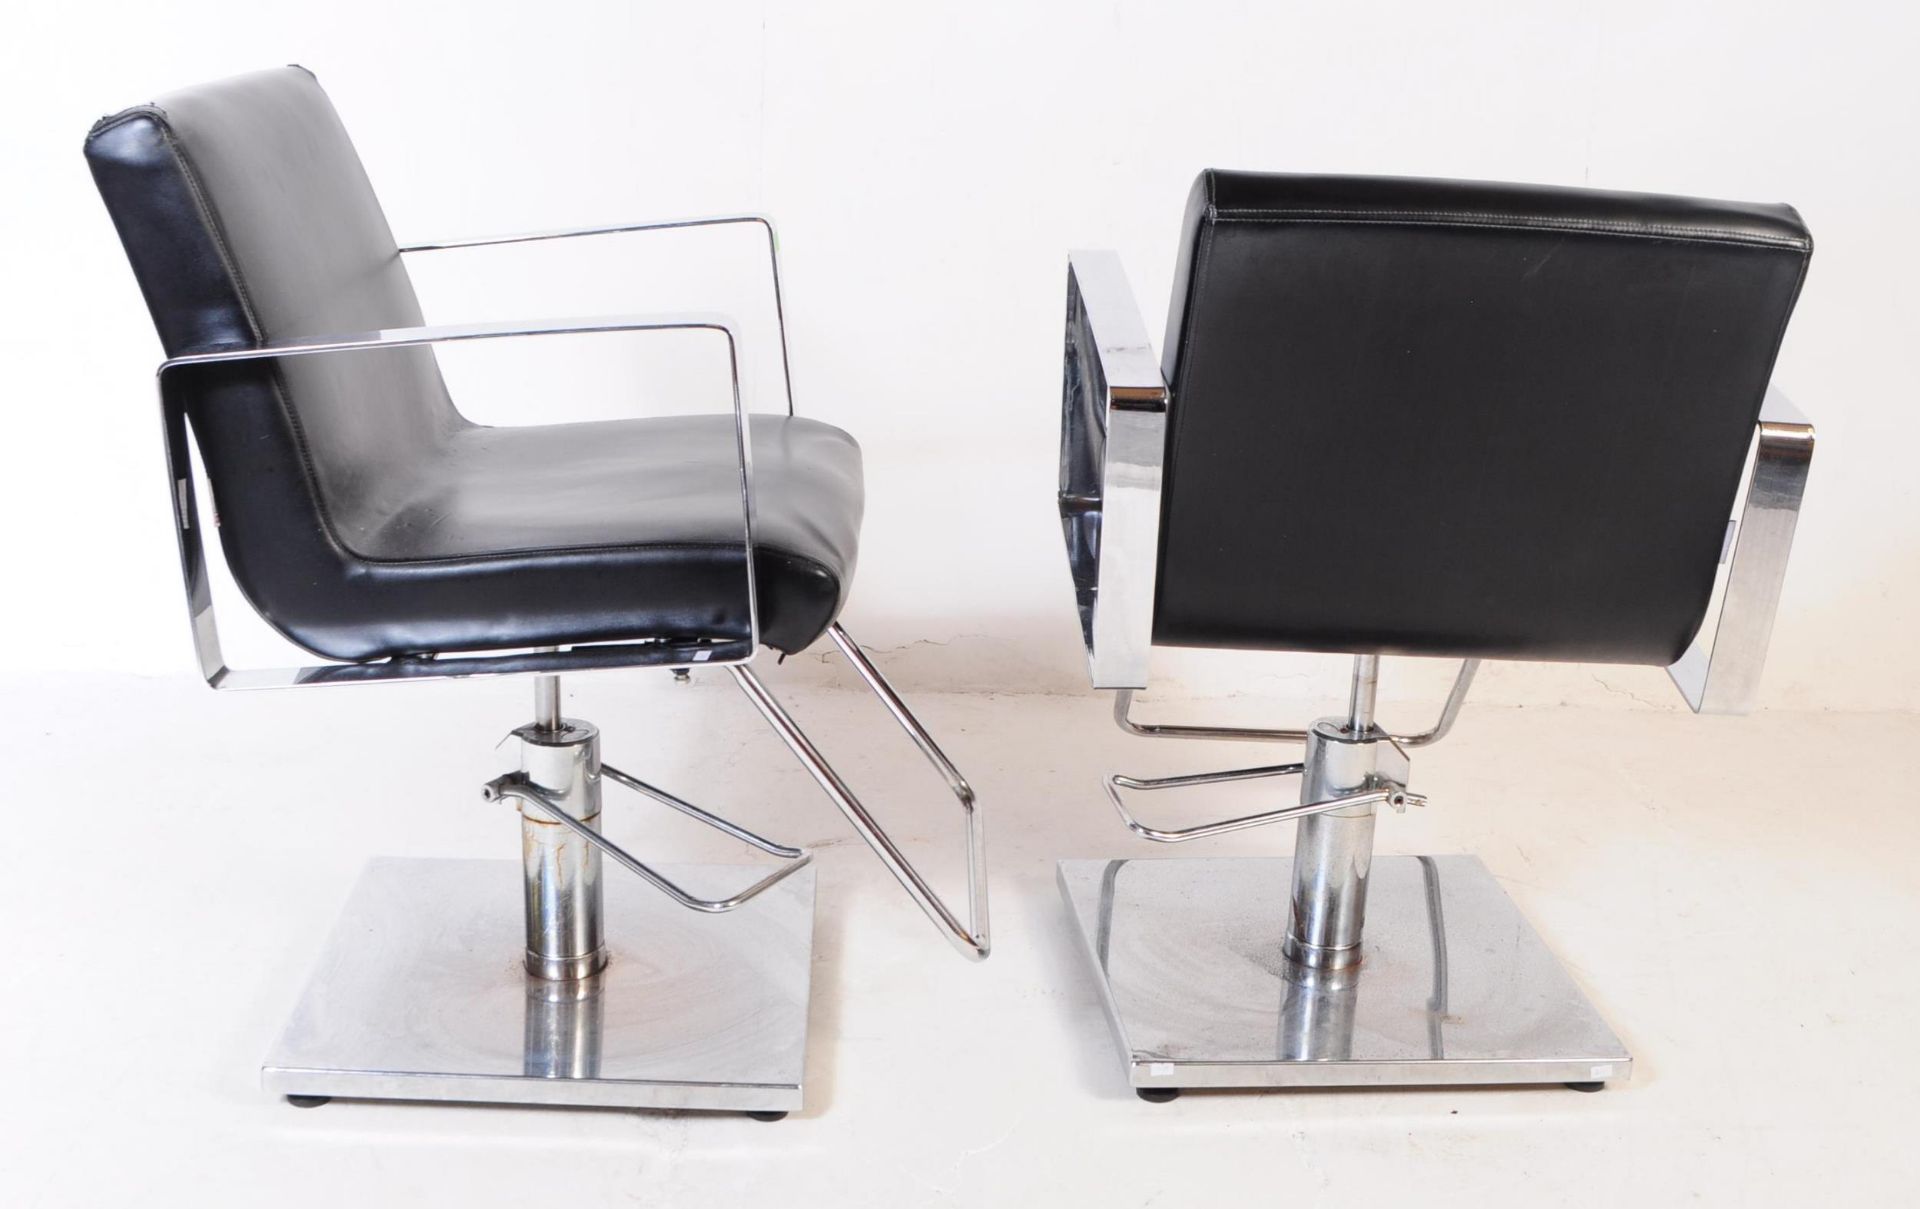 FOUR CONTEMPORARY BLACK VINYL SALON BARBER CHAIRS / ARMCHAIRS - Image 7 of 8